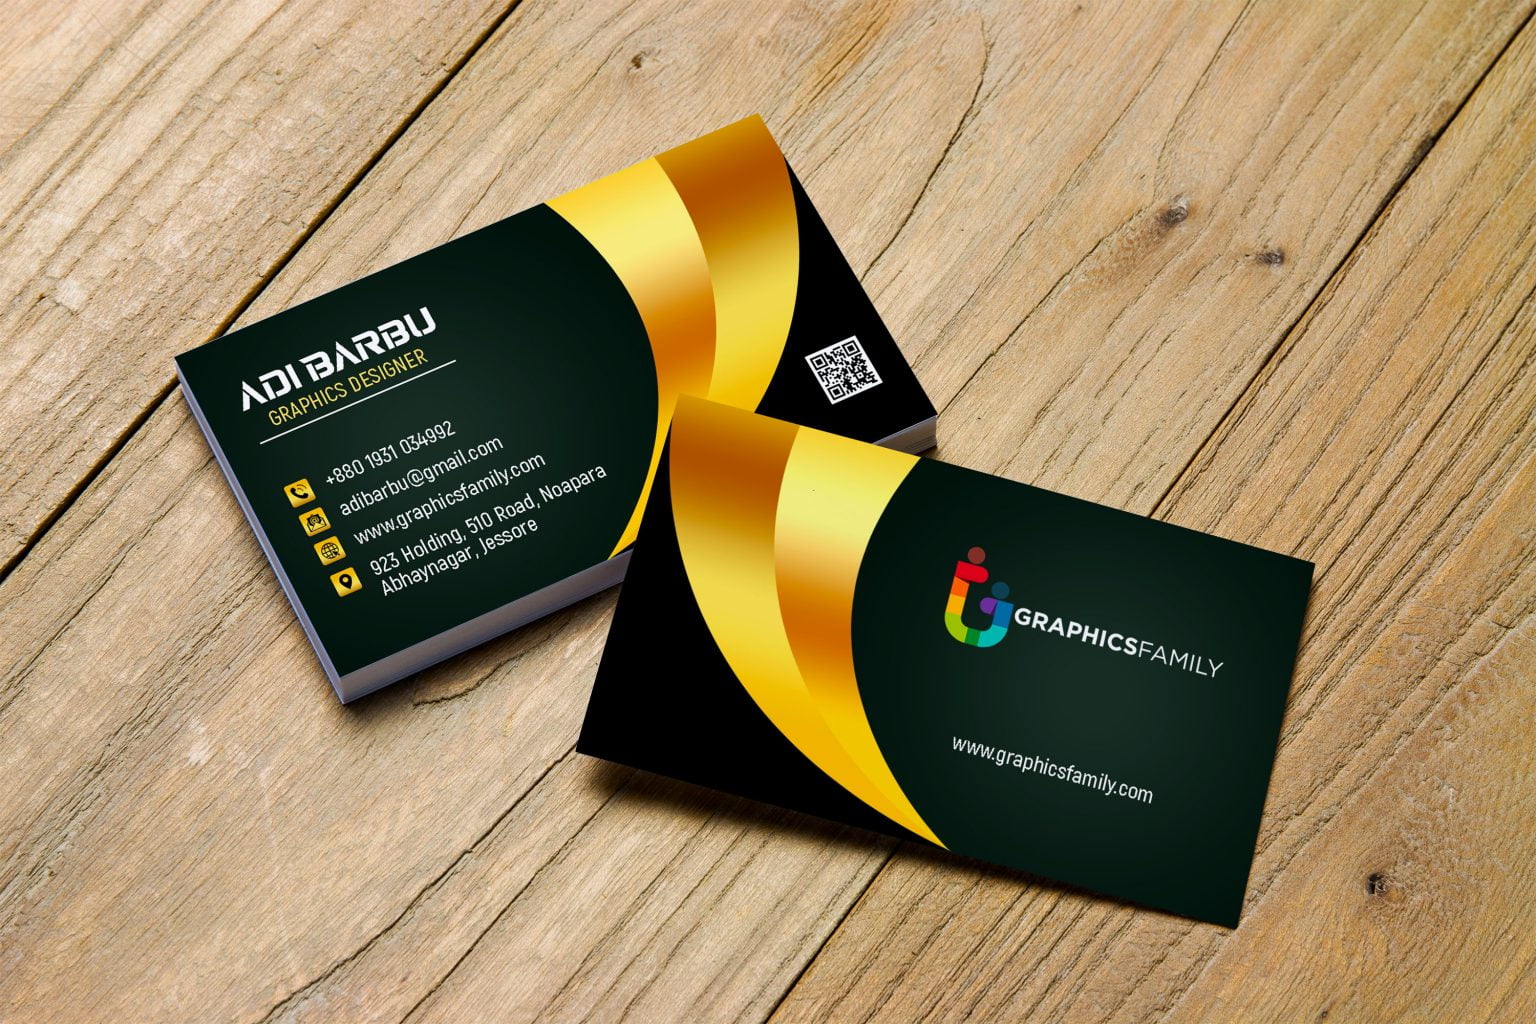 for iphone download Business Card Designer 5.15 + Pro free